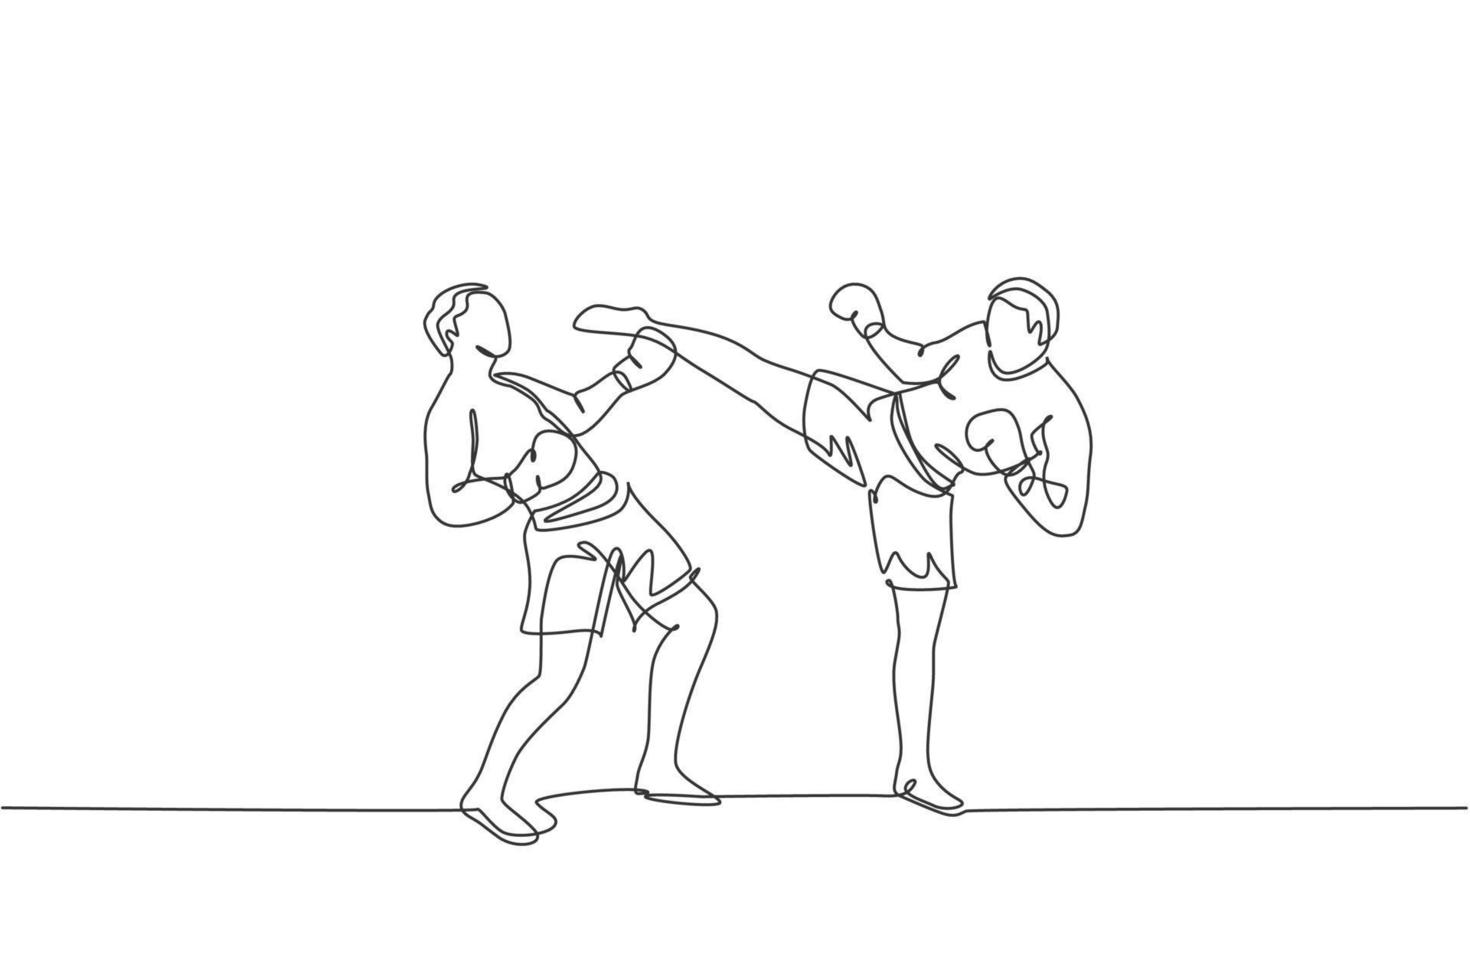 One single line drawing of young energetic man kickboxer practice sparring fight with partner in boxing arena vector illustration. Healthy lifestyle sport concept. Modern continuous line draw design